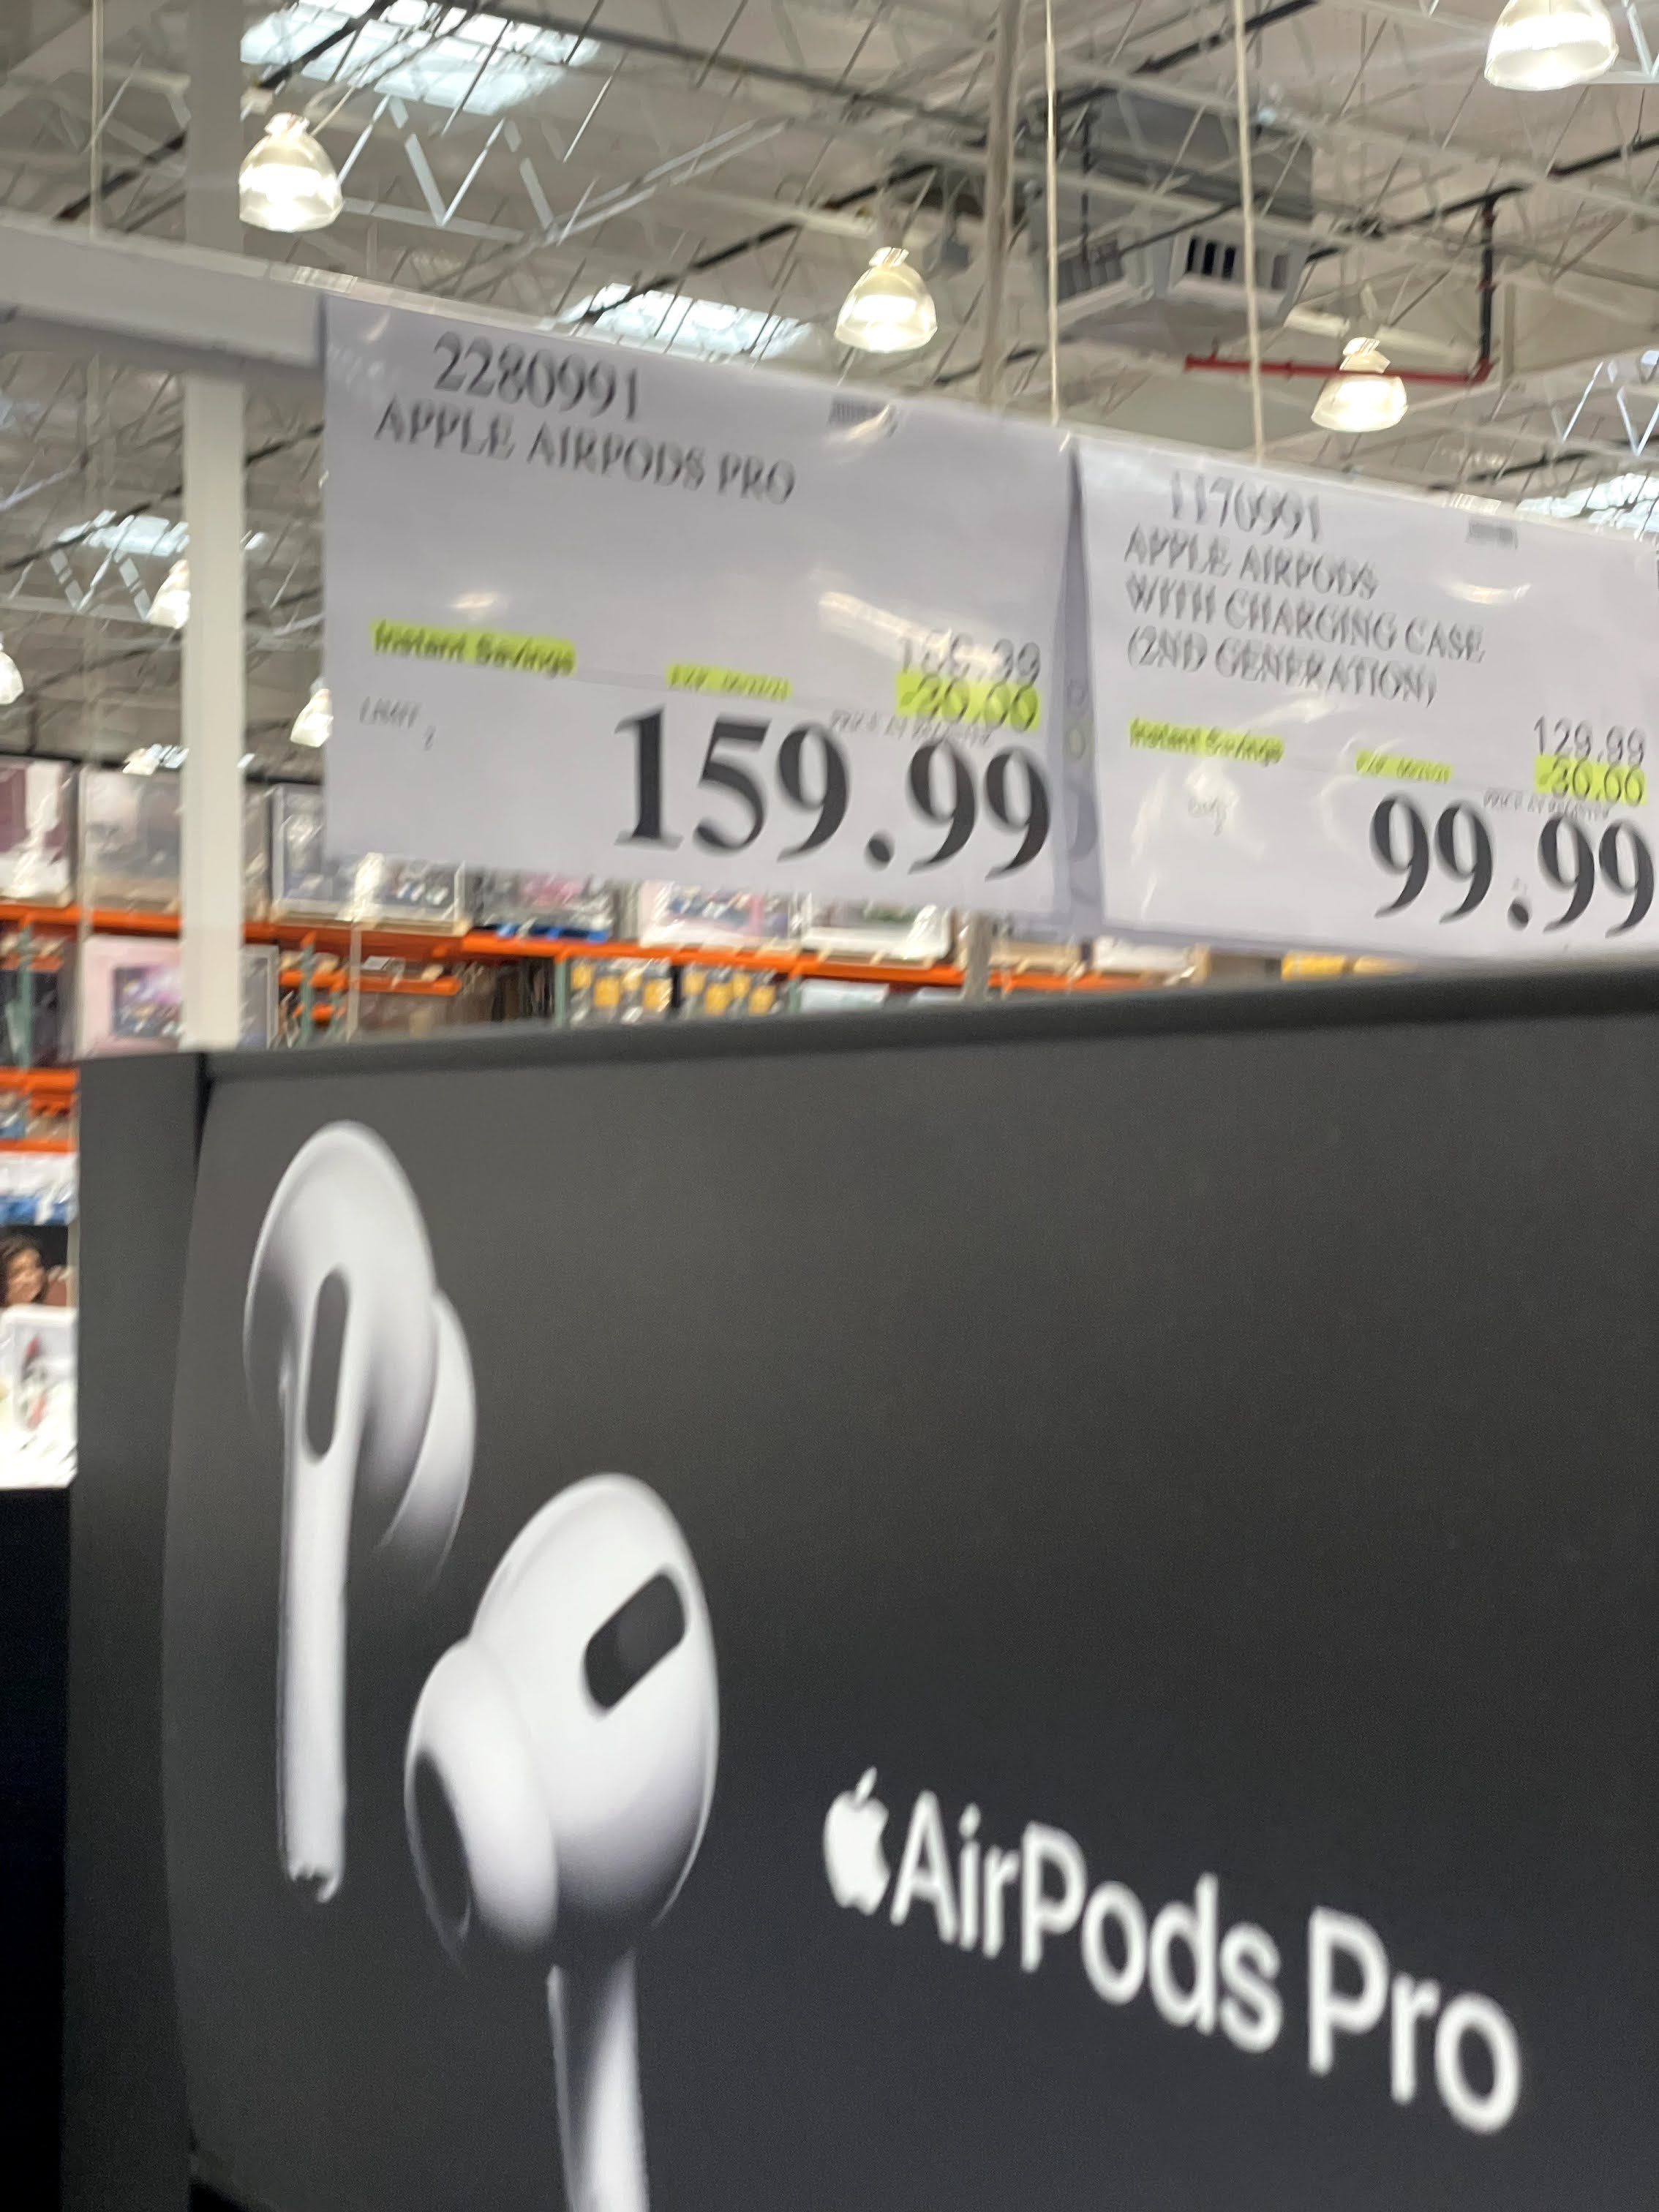 Airpods pro - 159 and 2nd gen - $99